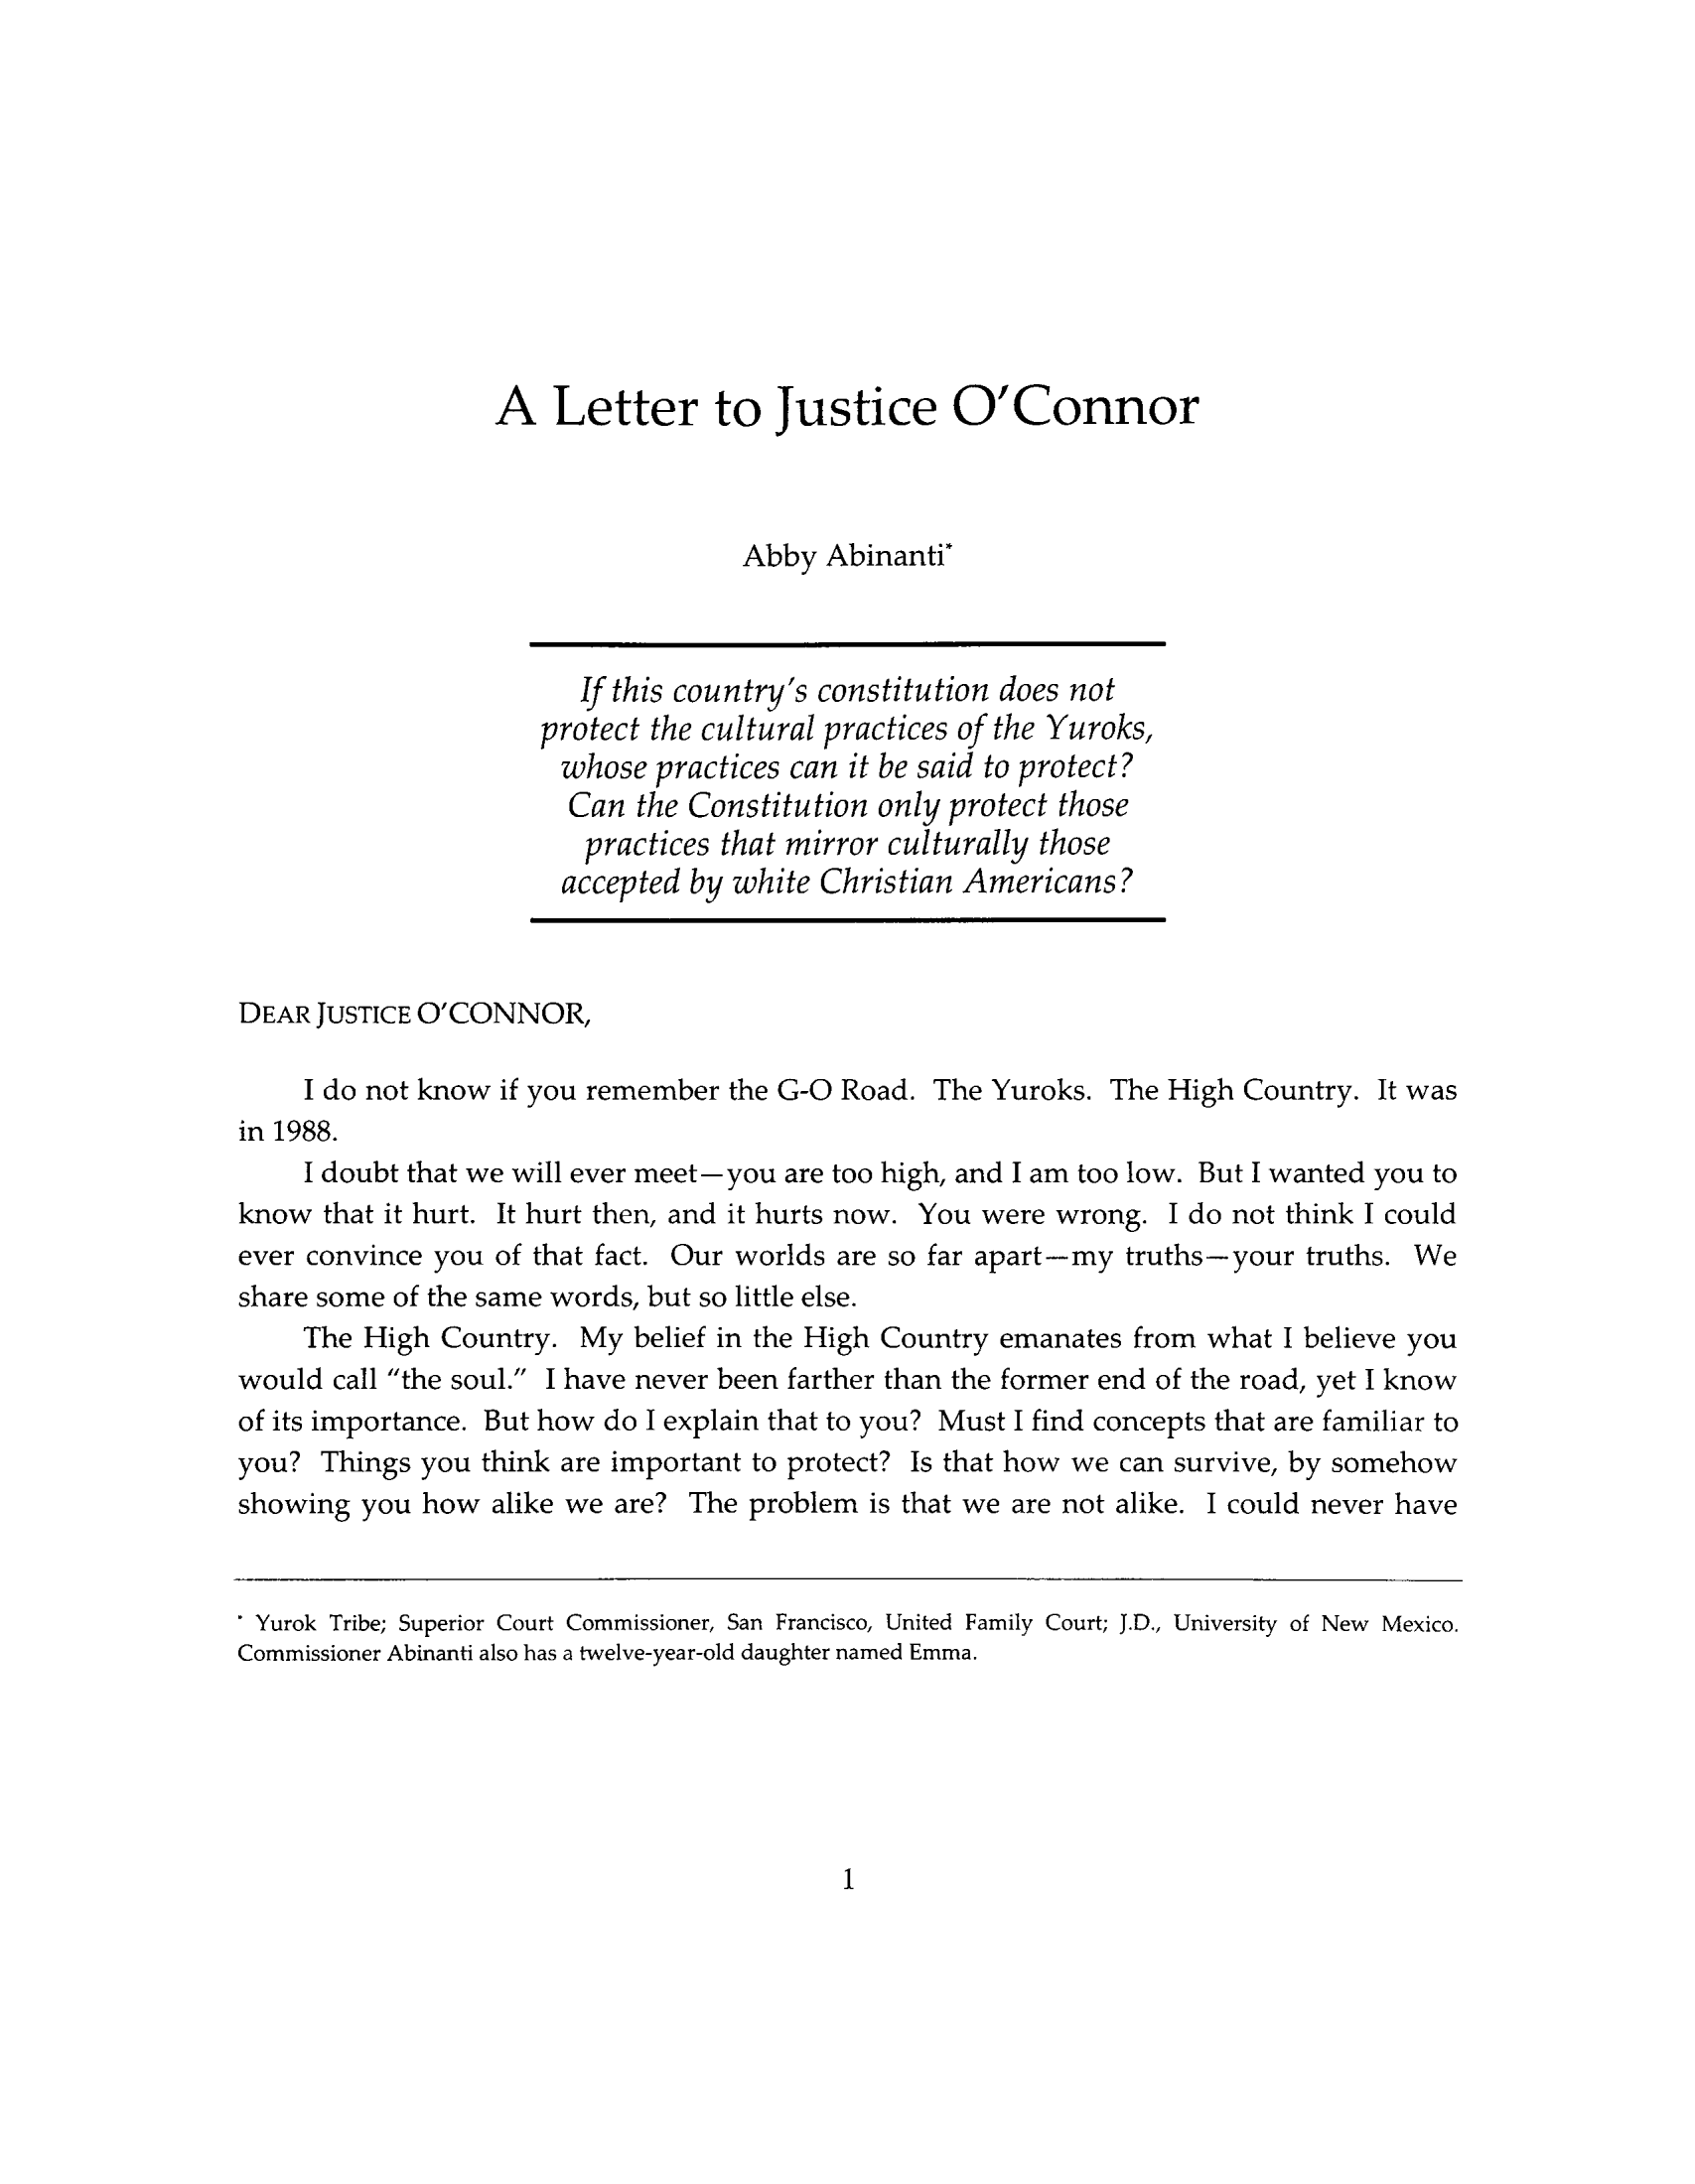 handle is hein.journals/indipeor1 and id is 11 raw text is: A Letter to Justice O'Connor
Abby Abinanti'
If this country's constitution does not
protect the cultural practices of the Yuroks,
whose practices can it be said to protect?
Can the Constitution only protect those
practices that mirror culturally those
accepted by white Christian Americans?
DEAR JUSTICE O'CONNOR,
I do not know if you remember the G-O Road. The Yuroks. The High Country. It was
in 1988.
I doubt that we will ever meet-you are too high, and I am too low. But I wanted you to
know that it hurt. It hurt then, and it hurts now. You were wrong. I do not think I could
ever convince you of that fact. Our worlds are so far apart-my truths-your truths. We
share some of the same words, but so little else.
The High Country. My belief in the High Country emanates from what I believe you
would call the soul. I have never been farther than the former end of the road, yet I know
of its importance. But how do I explain that to you? Must I find concepts that are familiar to
you? Things you think are important to protect? Is that how we can survive, by somehow
showing you how alike we are? The problem is that we are not alike. I could never have
* Yurok Tribe; Superior Court Commissioner, San Francisco, United Family Court; J.D., University of New Mexico.
Commissioner Abinanti also has a twelve-year-old daughter named Emma.

1


